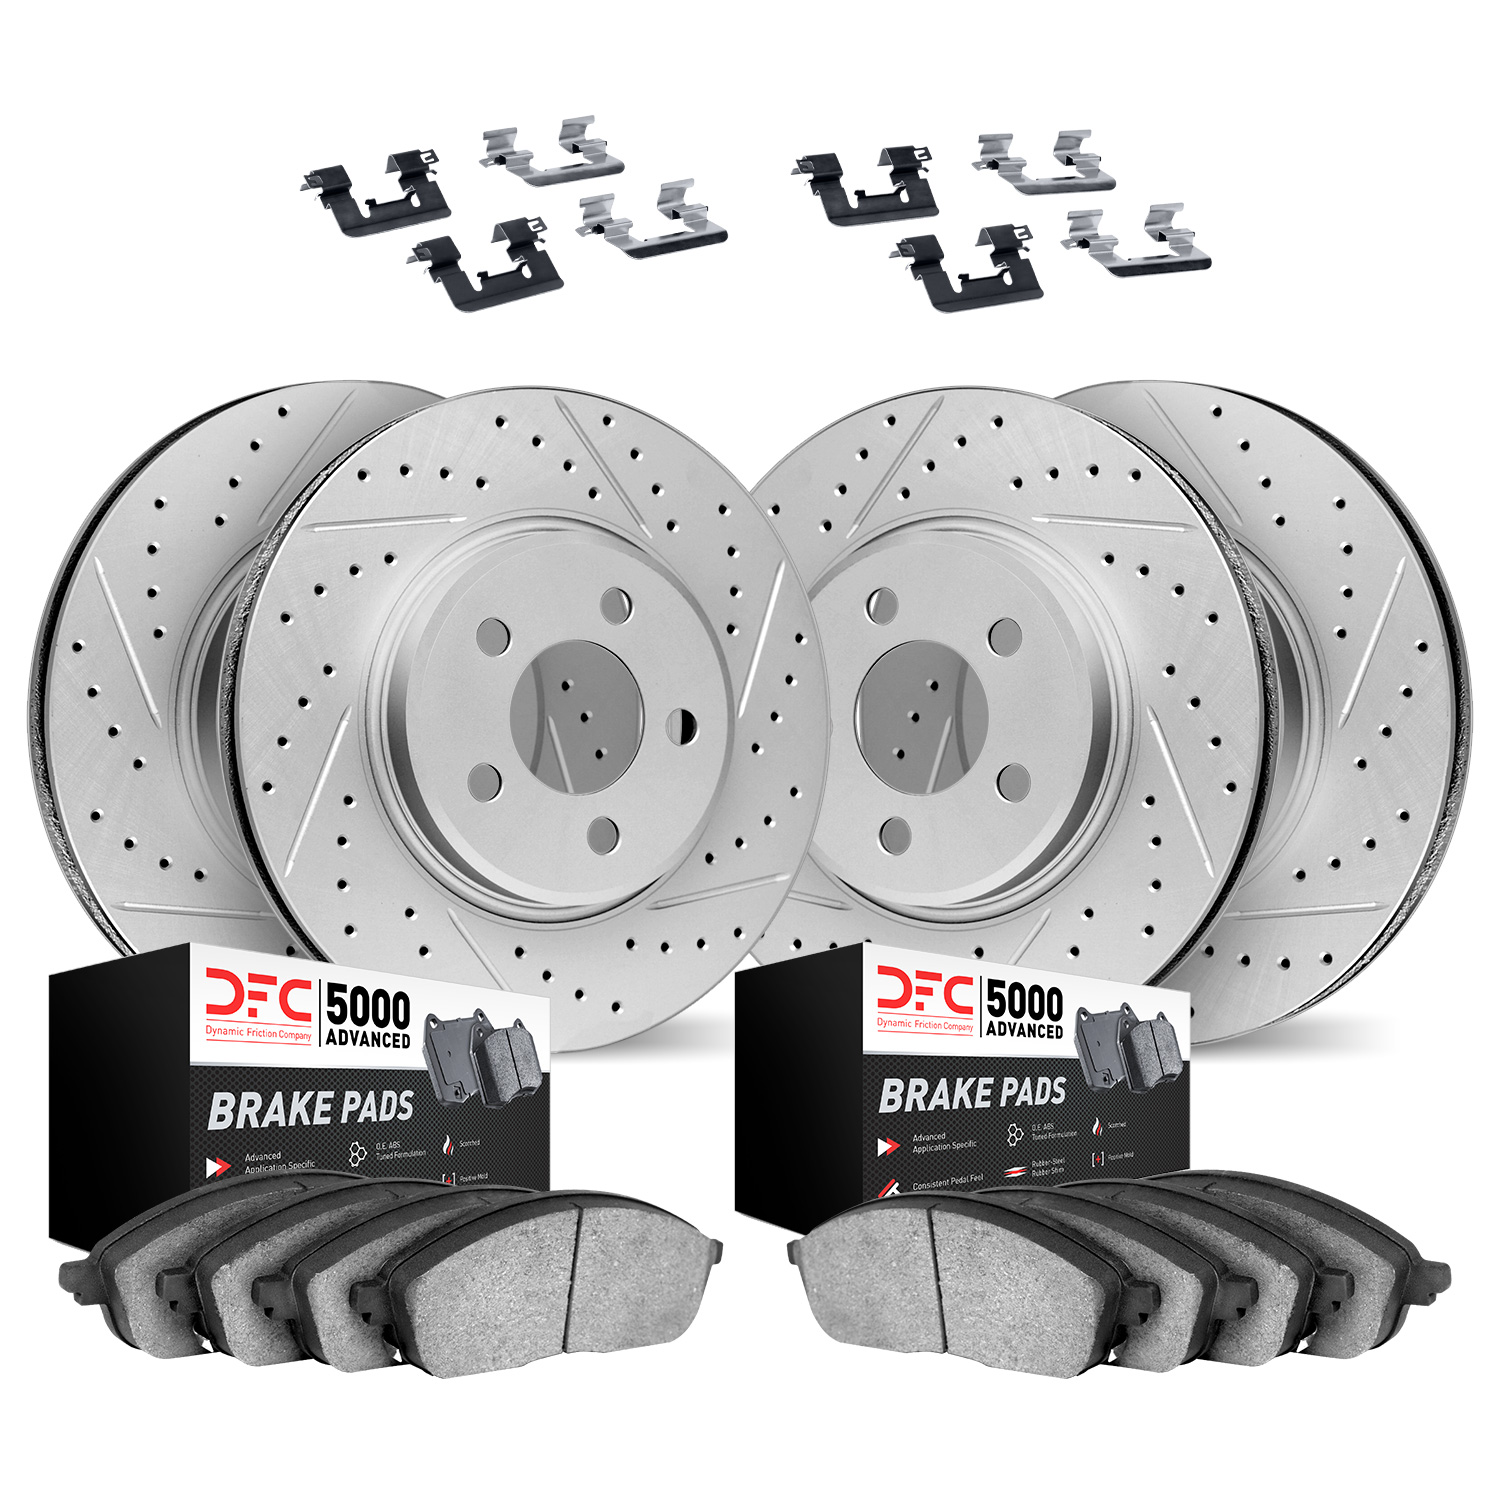 2514-63003 Geoperformance Drilled/Slotted Rotors w/5000 Advanced Brake Pads Kit & Hardware, 2017-2019 Mercedes-Benz, Position: F